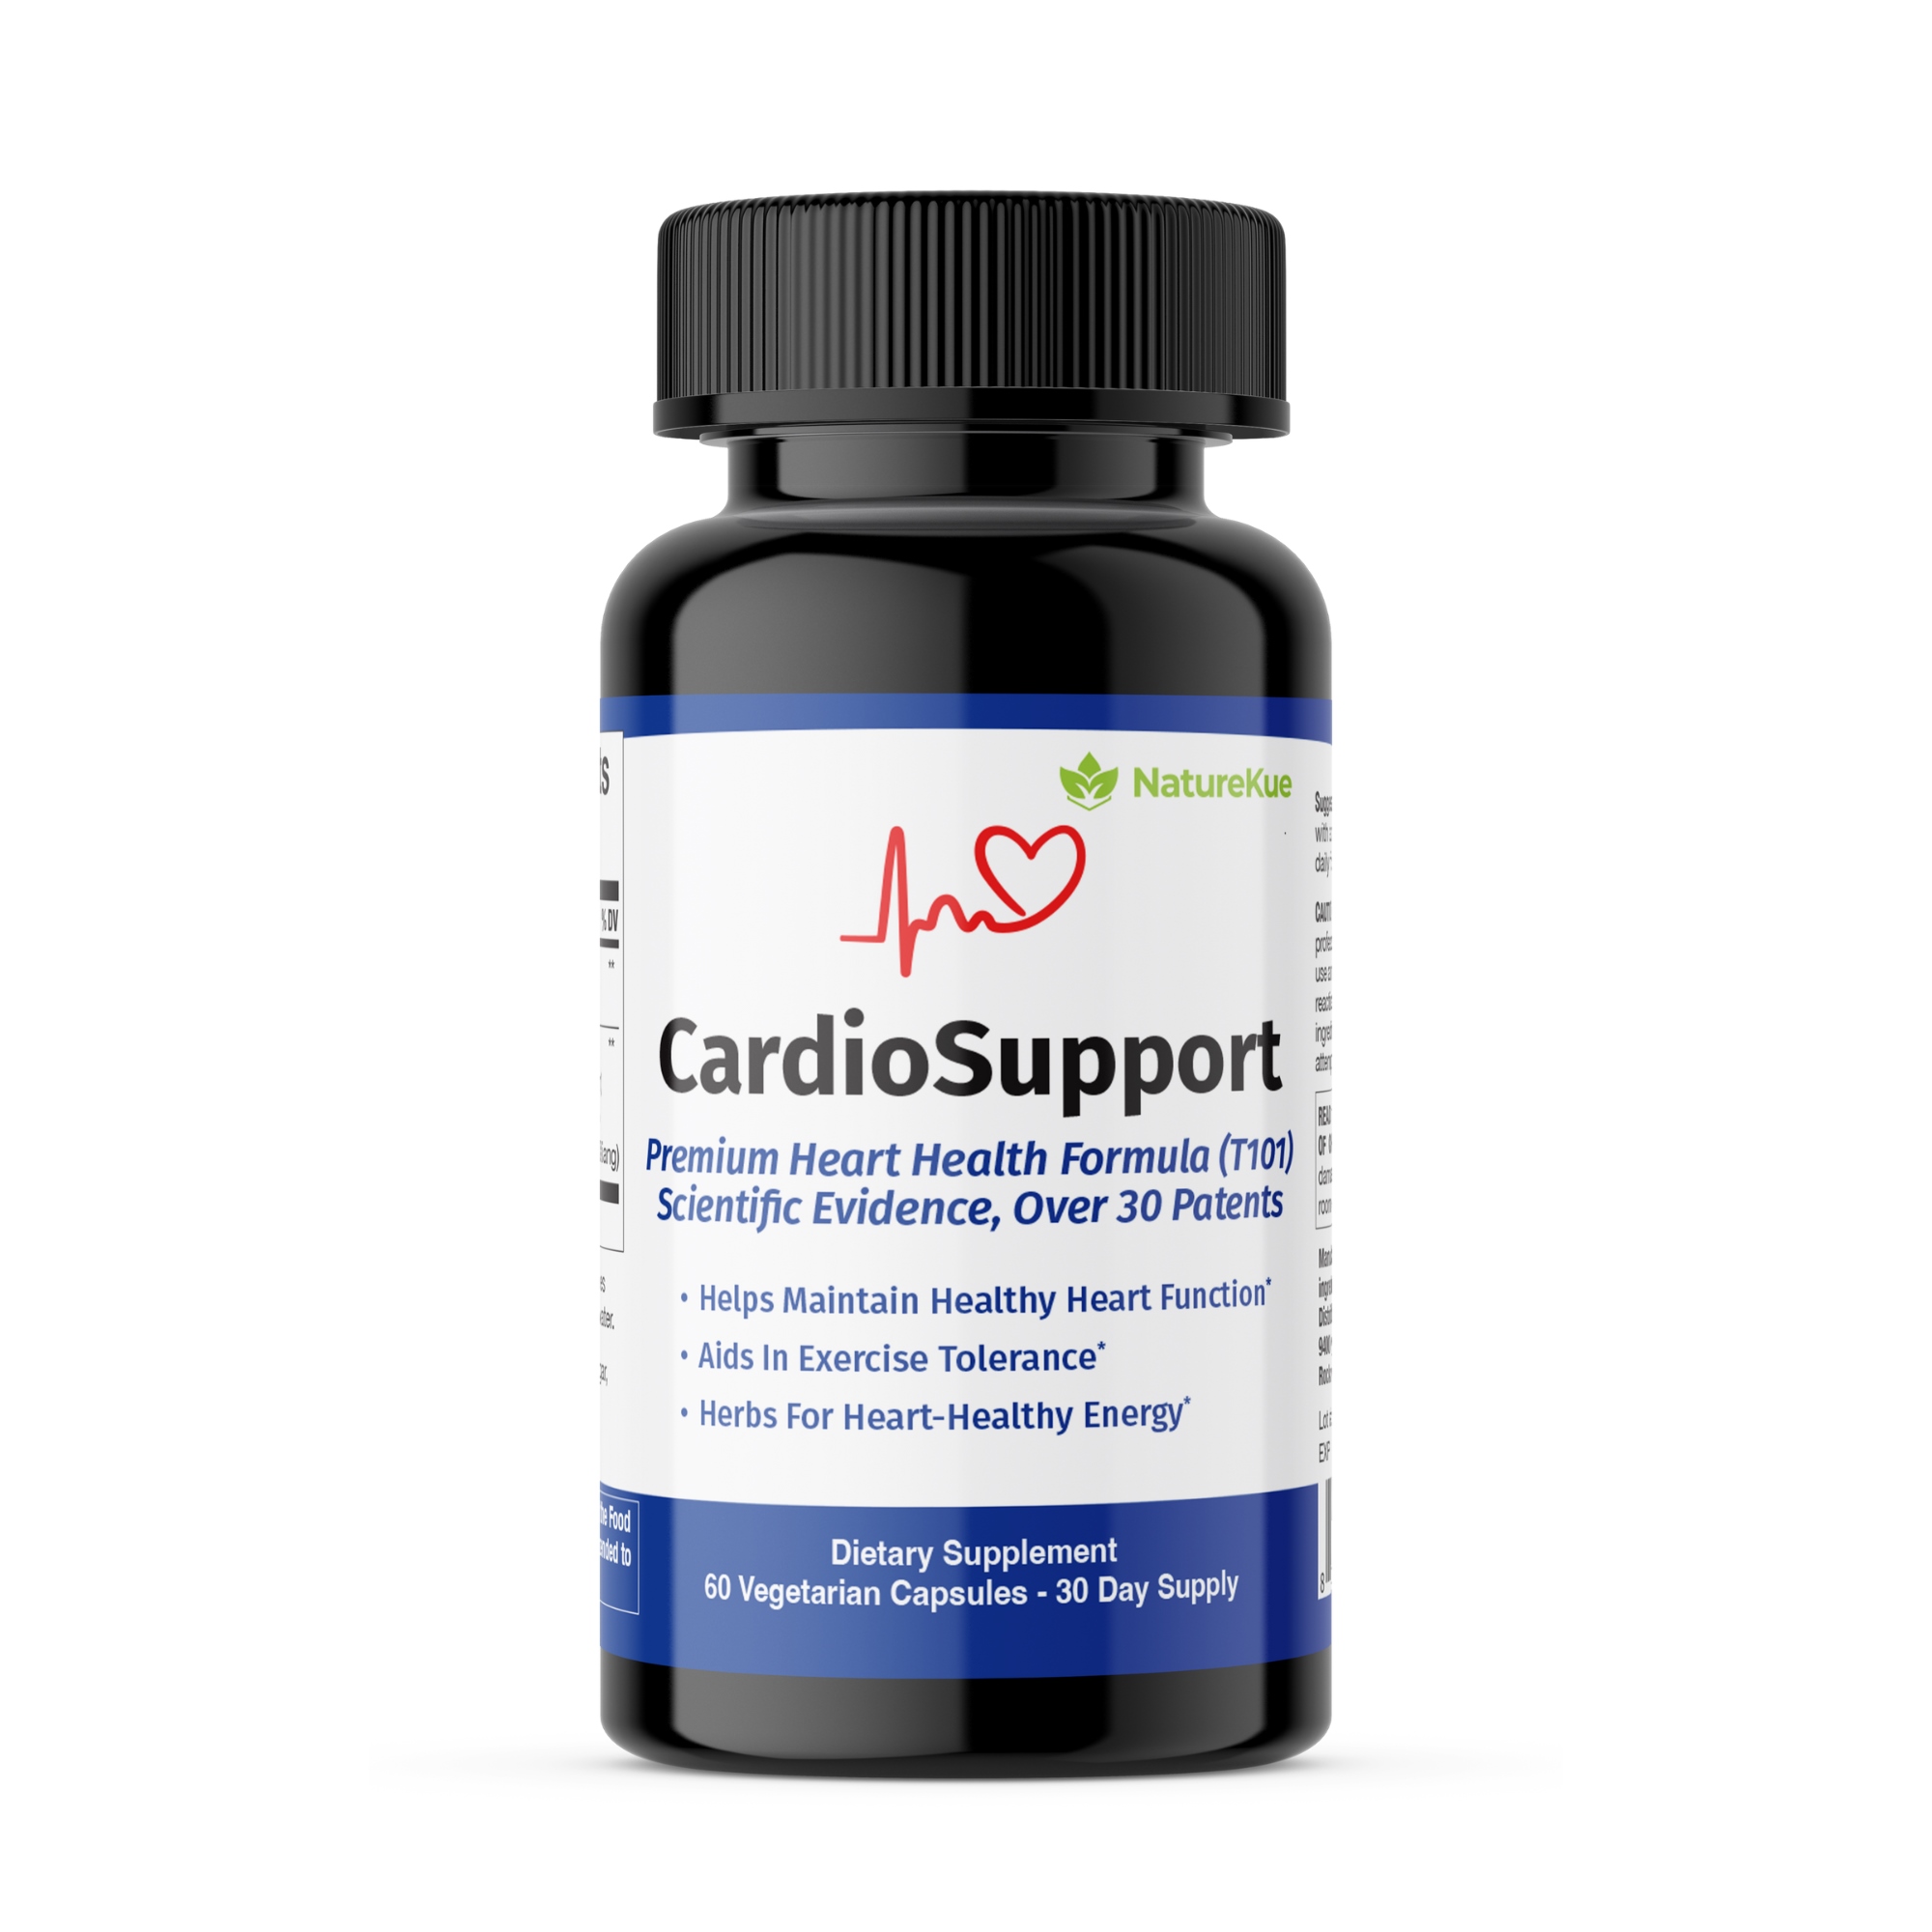 NatureKue Introduces CardioSupport - Dietary Supplement Supports Healthy Heart Function and Improves Exercise Tolerance